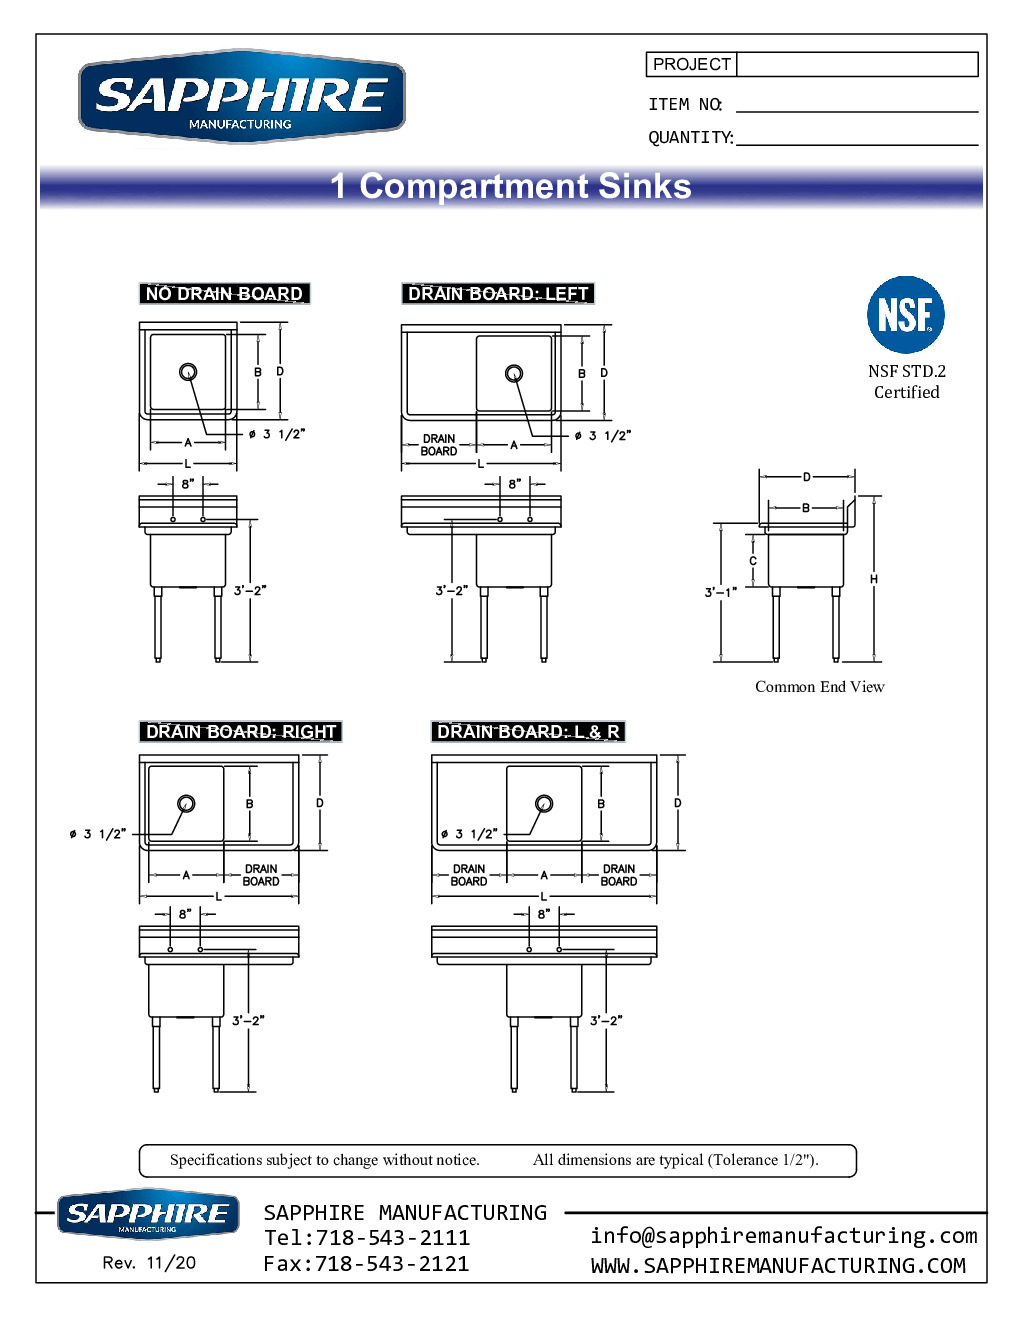 Sapphire Manufacturing SMS-1515R (1) One Compartment Sink